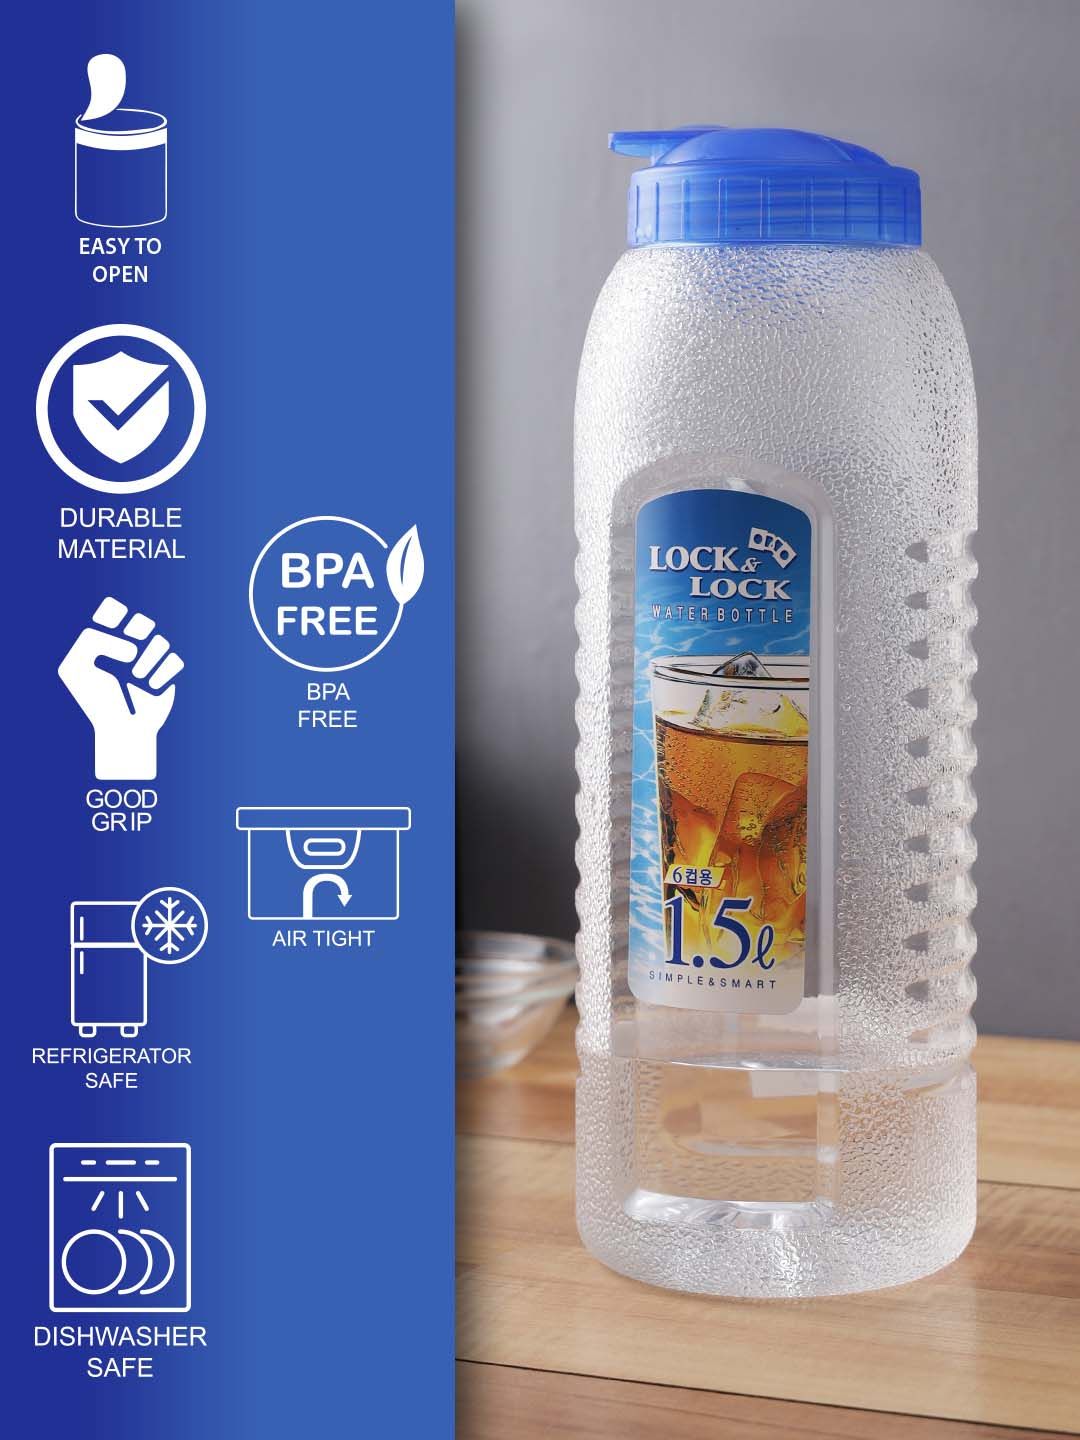 Lock & Lock Transparent & Blue Solid Easy Grip BPA Free Water Bottle Price in India